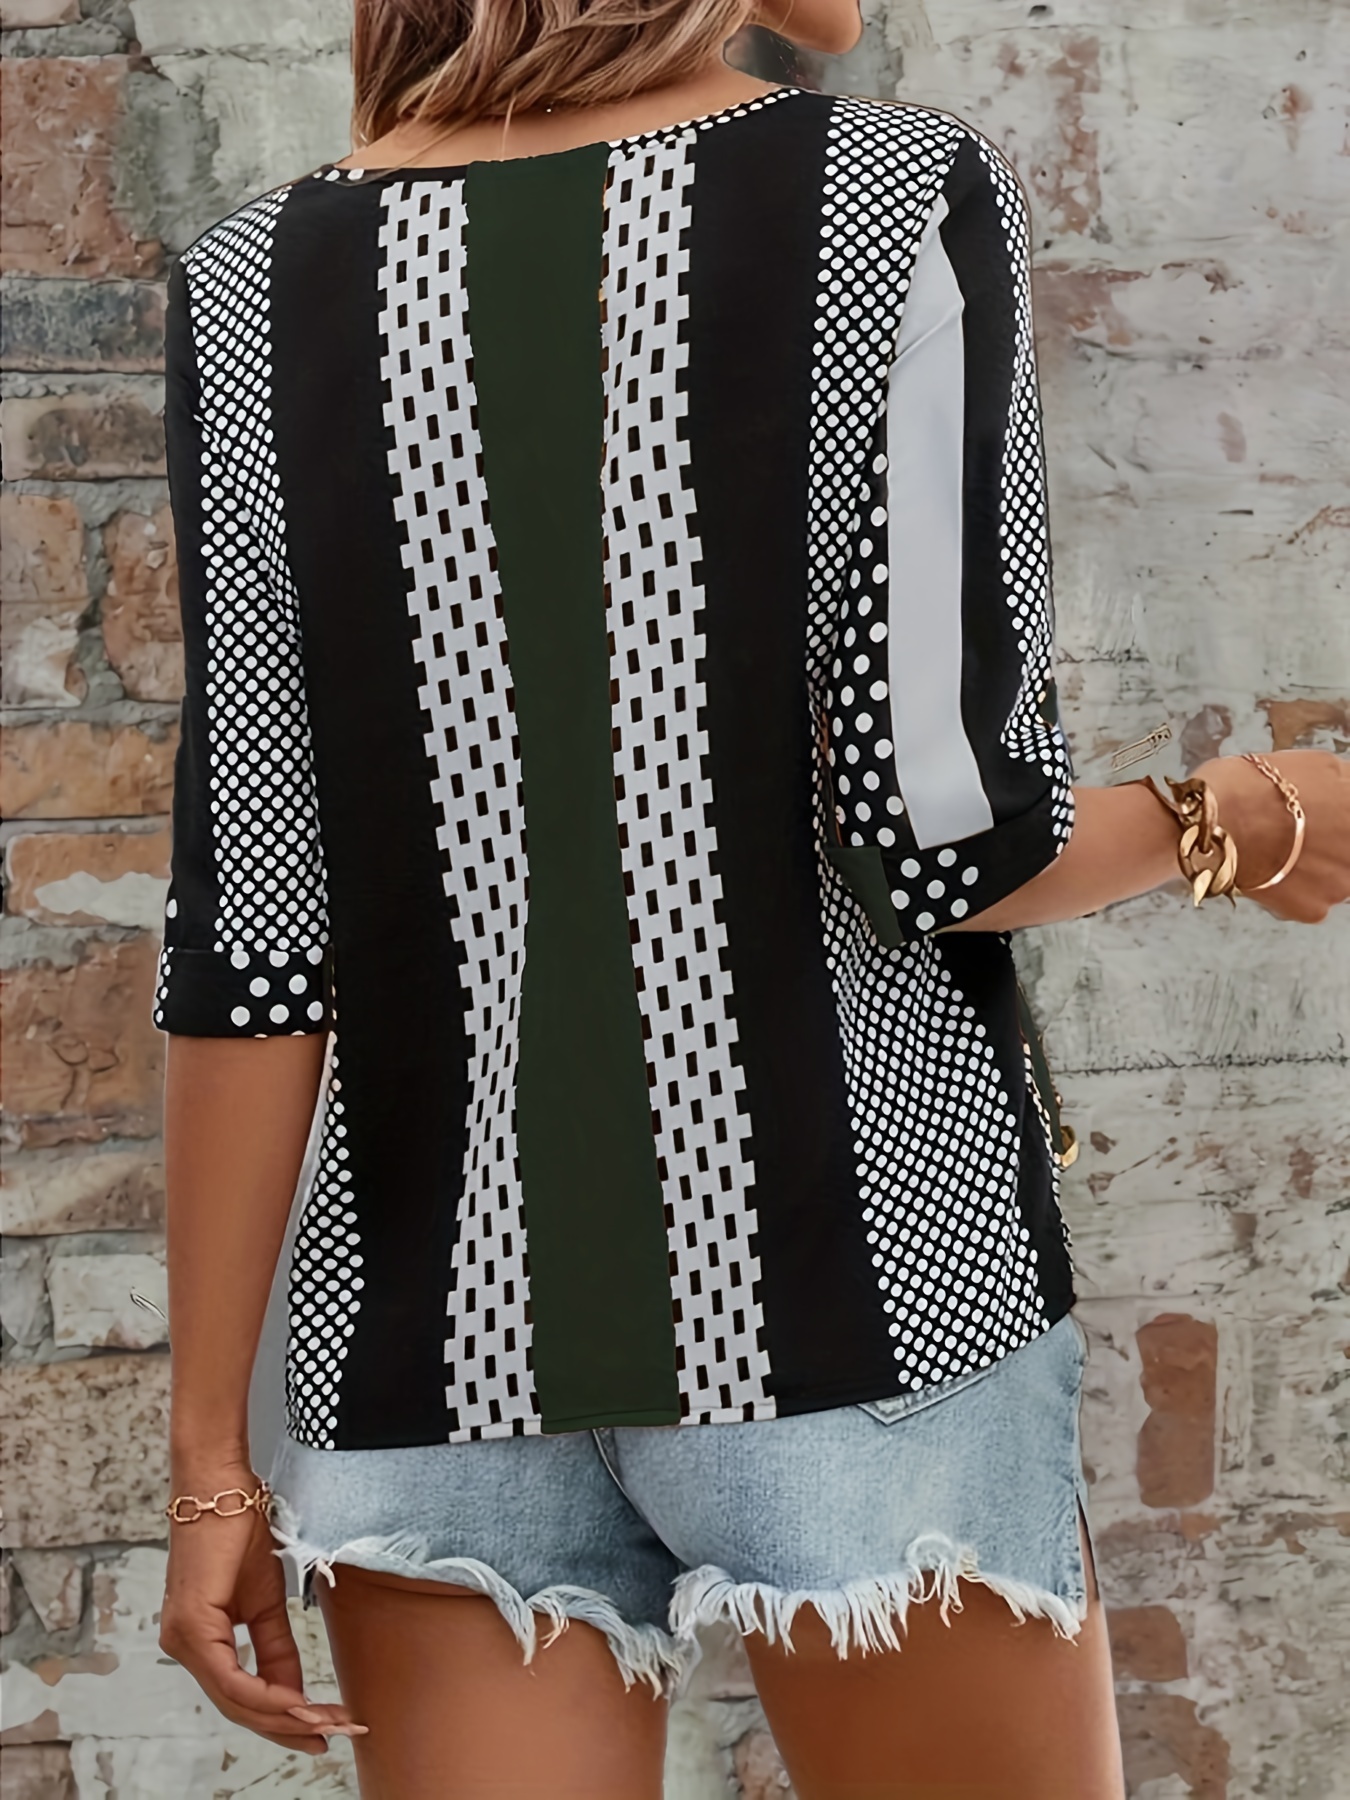 Long-sleeved Blouse - Black/white dotted - Ladies